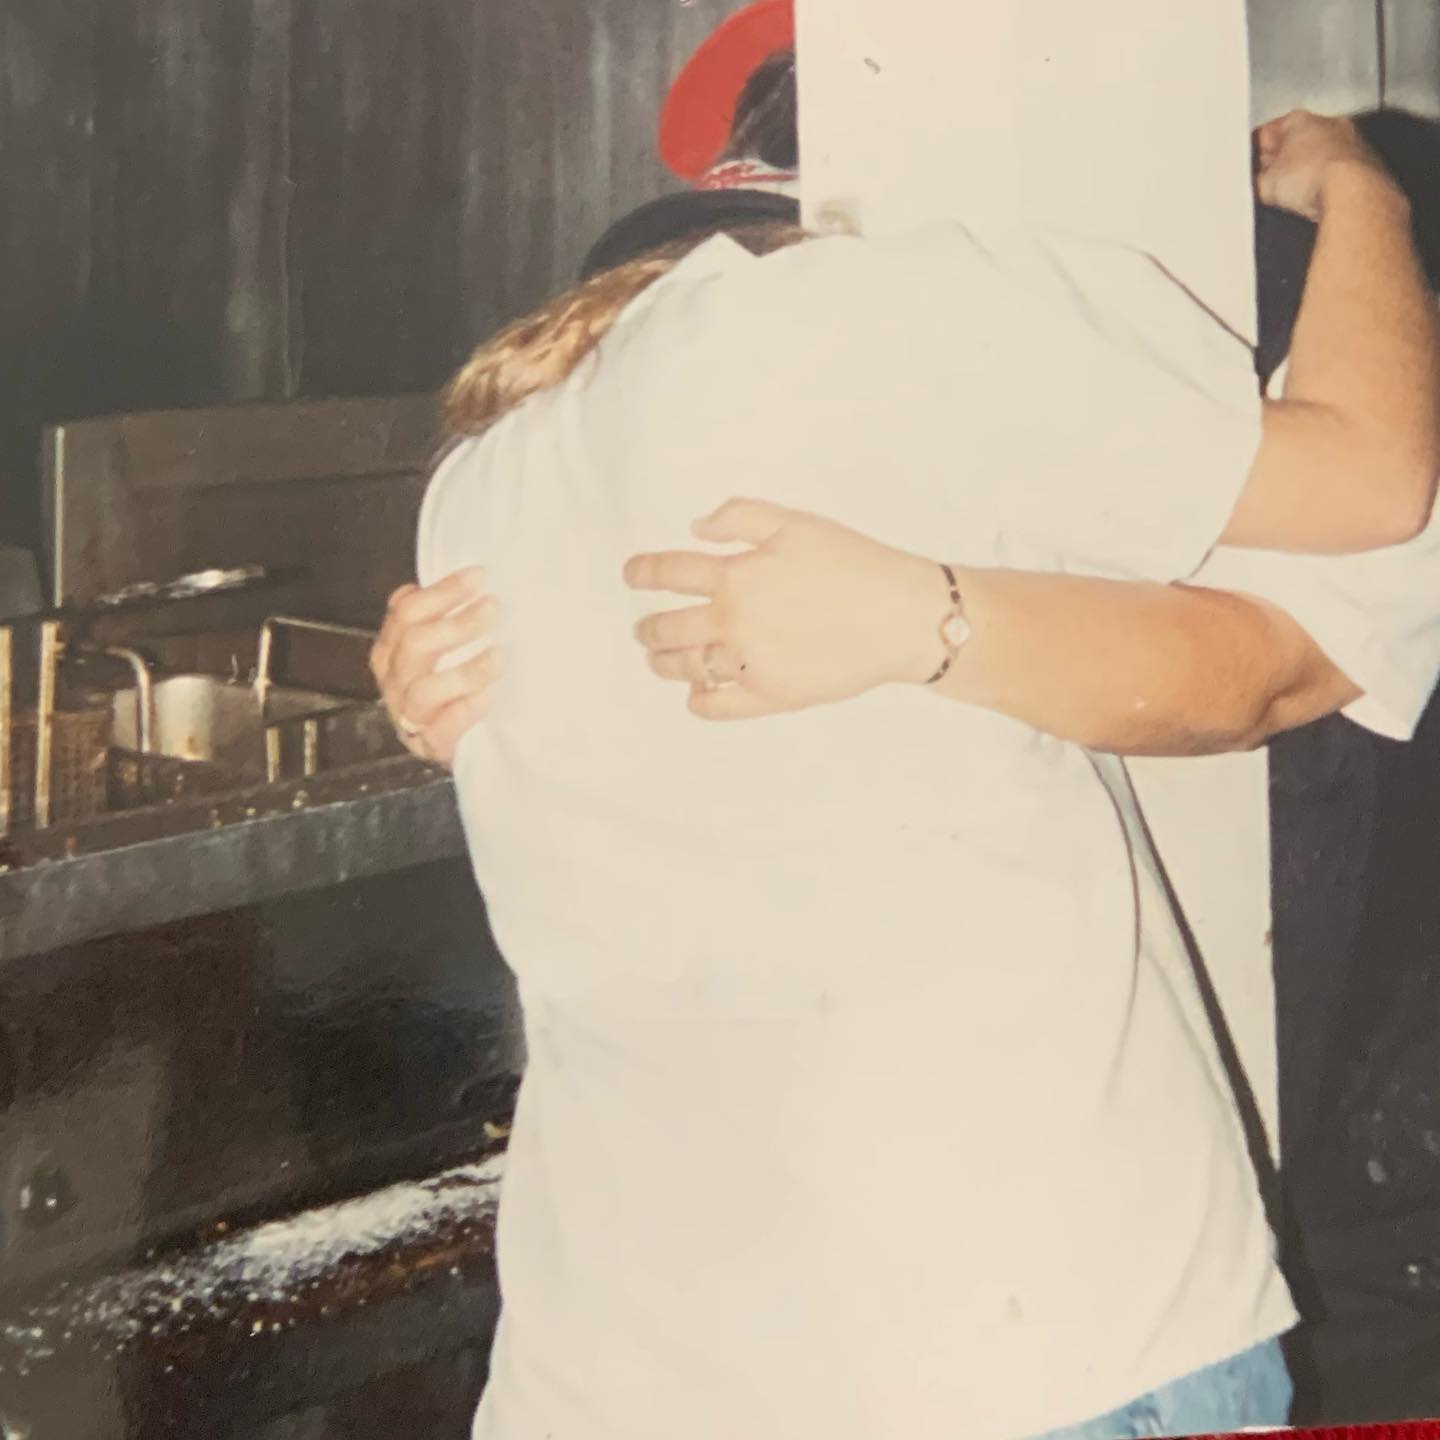 Good morning peaches!!!
This picture is circa 1994. This is mom & I after a very long day at our cafe (The Harrison St Cafe). As you can see, it’s been me & her from the beginning. This weekend we catered the Bicentennial Gala here in Shelbyville, doing the desserts & hors d’oeuvres. The majority of all those goodies were prepared by this wonderful woman while I Continued to run the cafe. We committed to this and she held true (as always) by my side. Thank you mom, for always being my Lucy (or Ethel) in our wild adventures & ‘great ideas’!